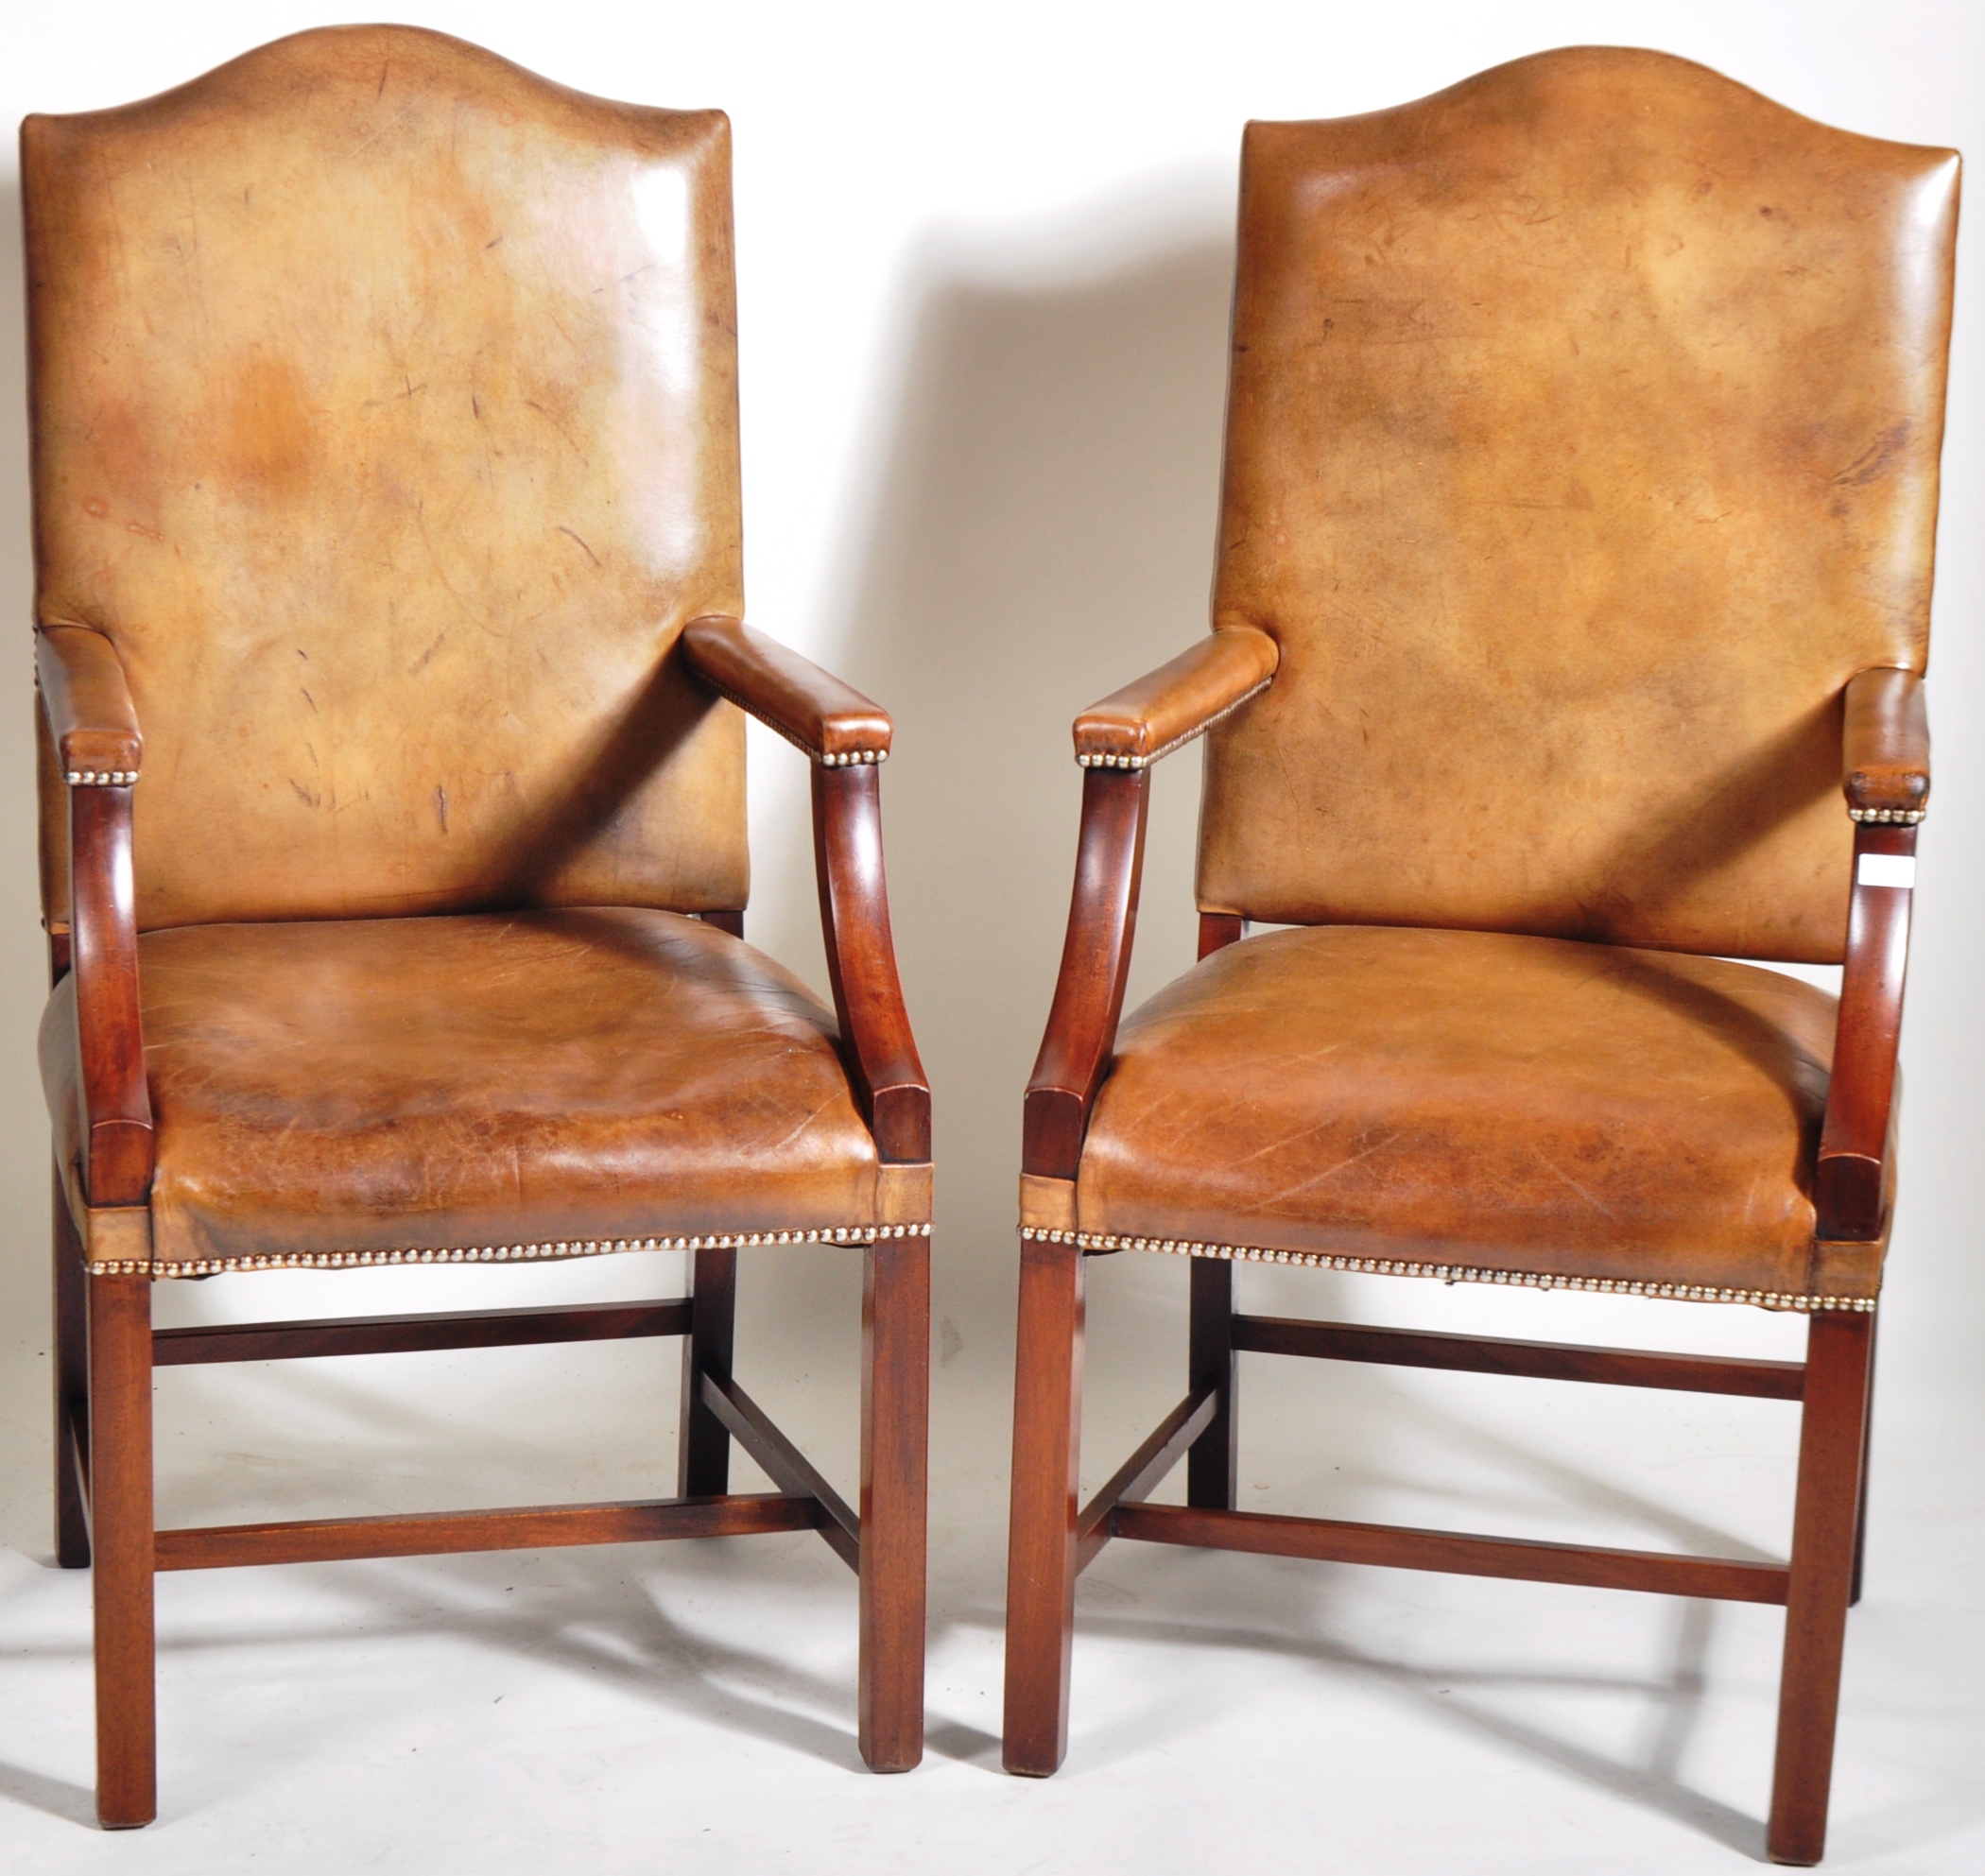 PAIR OF GEORGE II MANNER FAUX LEATHER GAINSBOROUGH ARMCHAIRS - Image 2 of 7